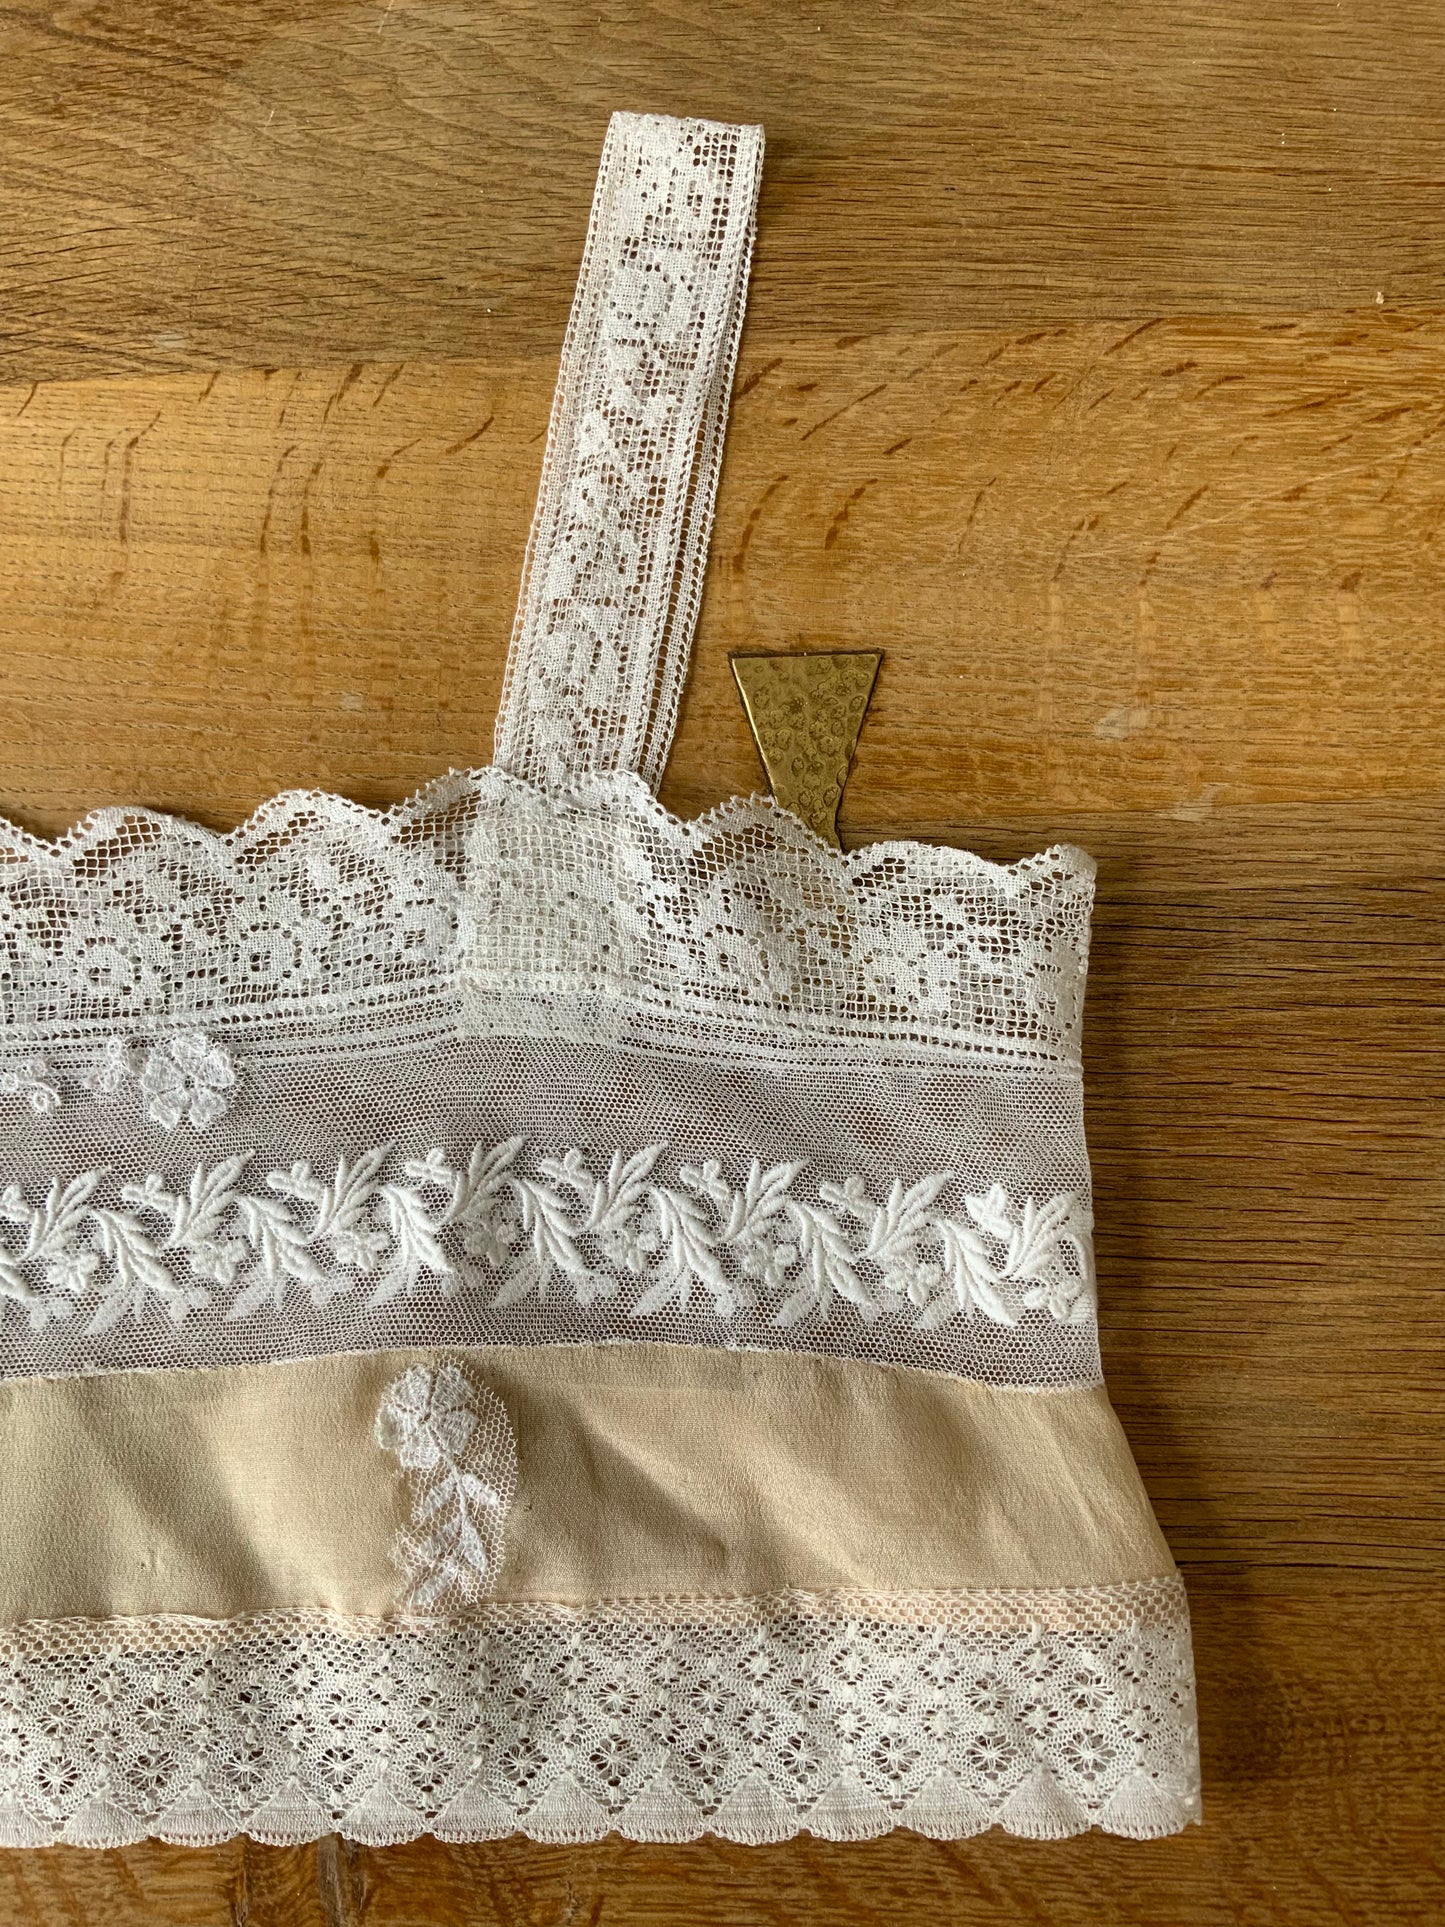 Antique Camisole Cropped - 1900